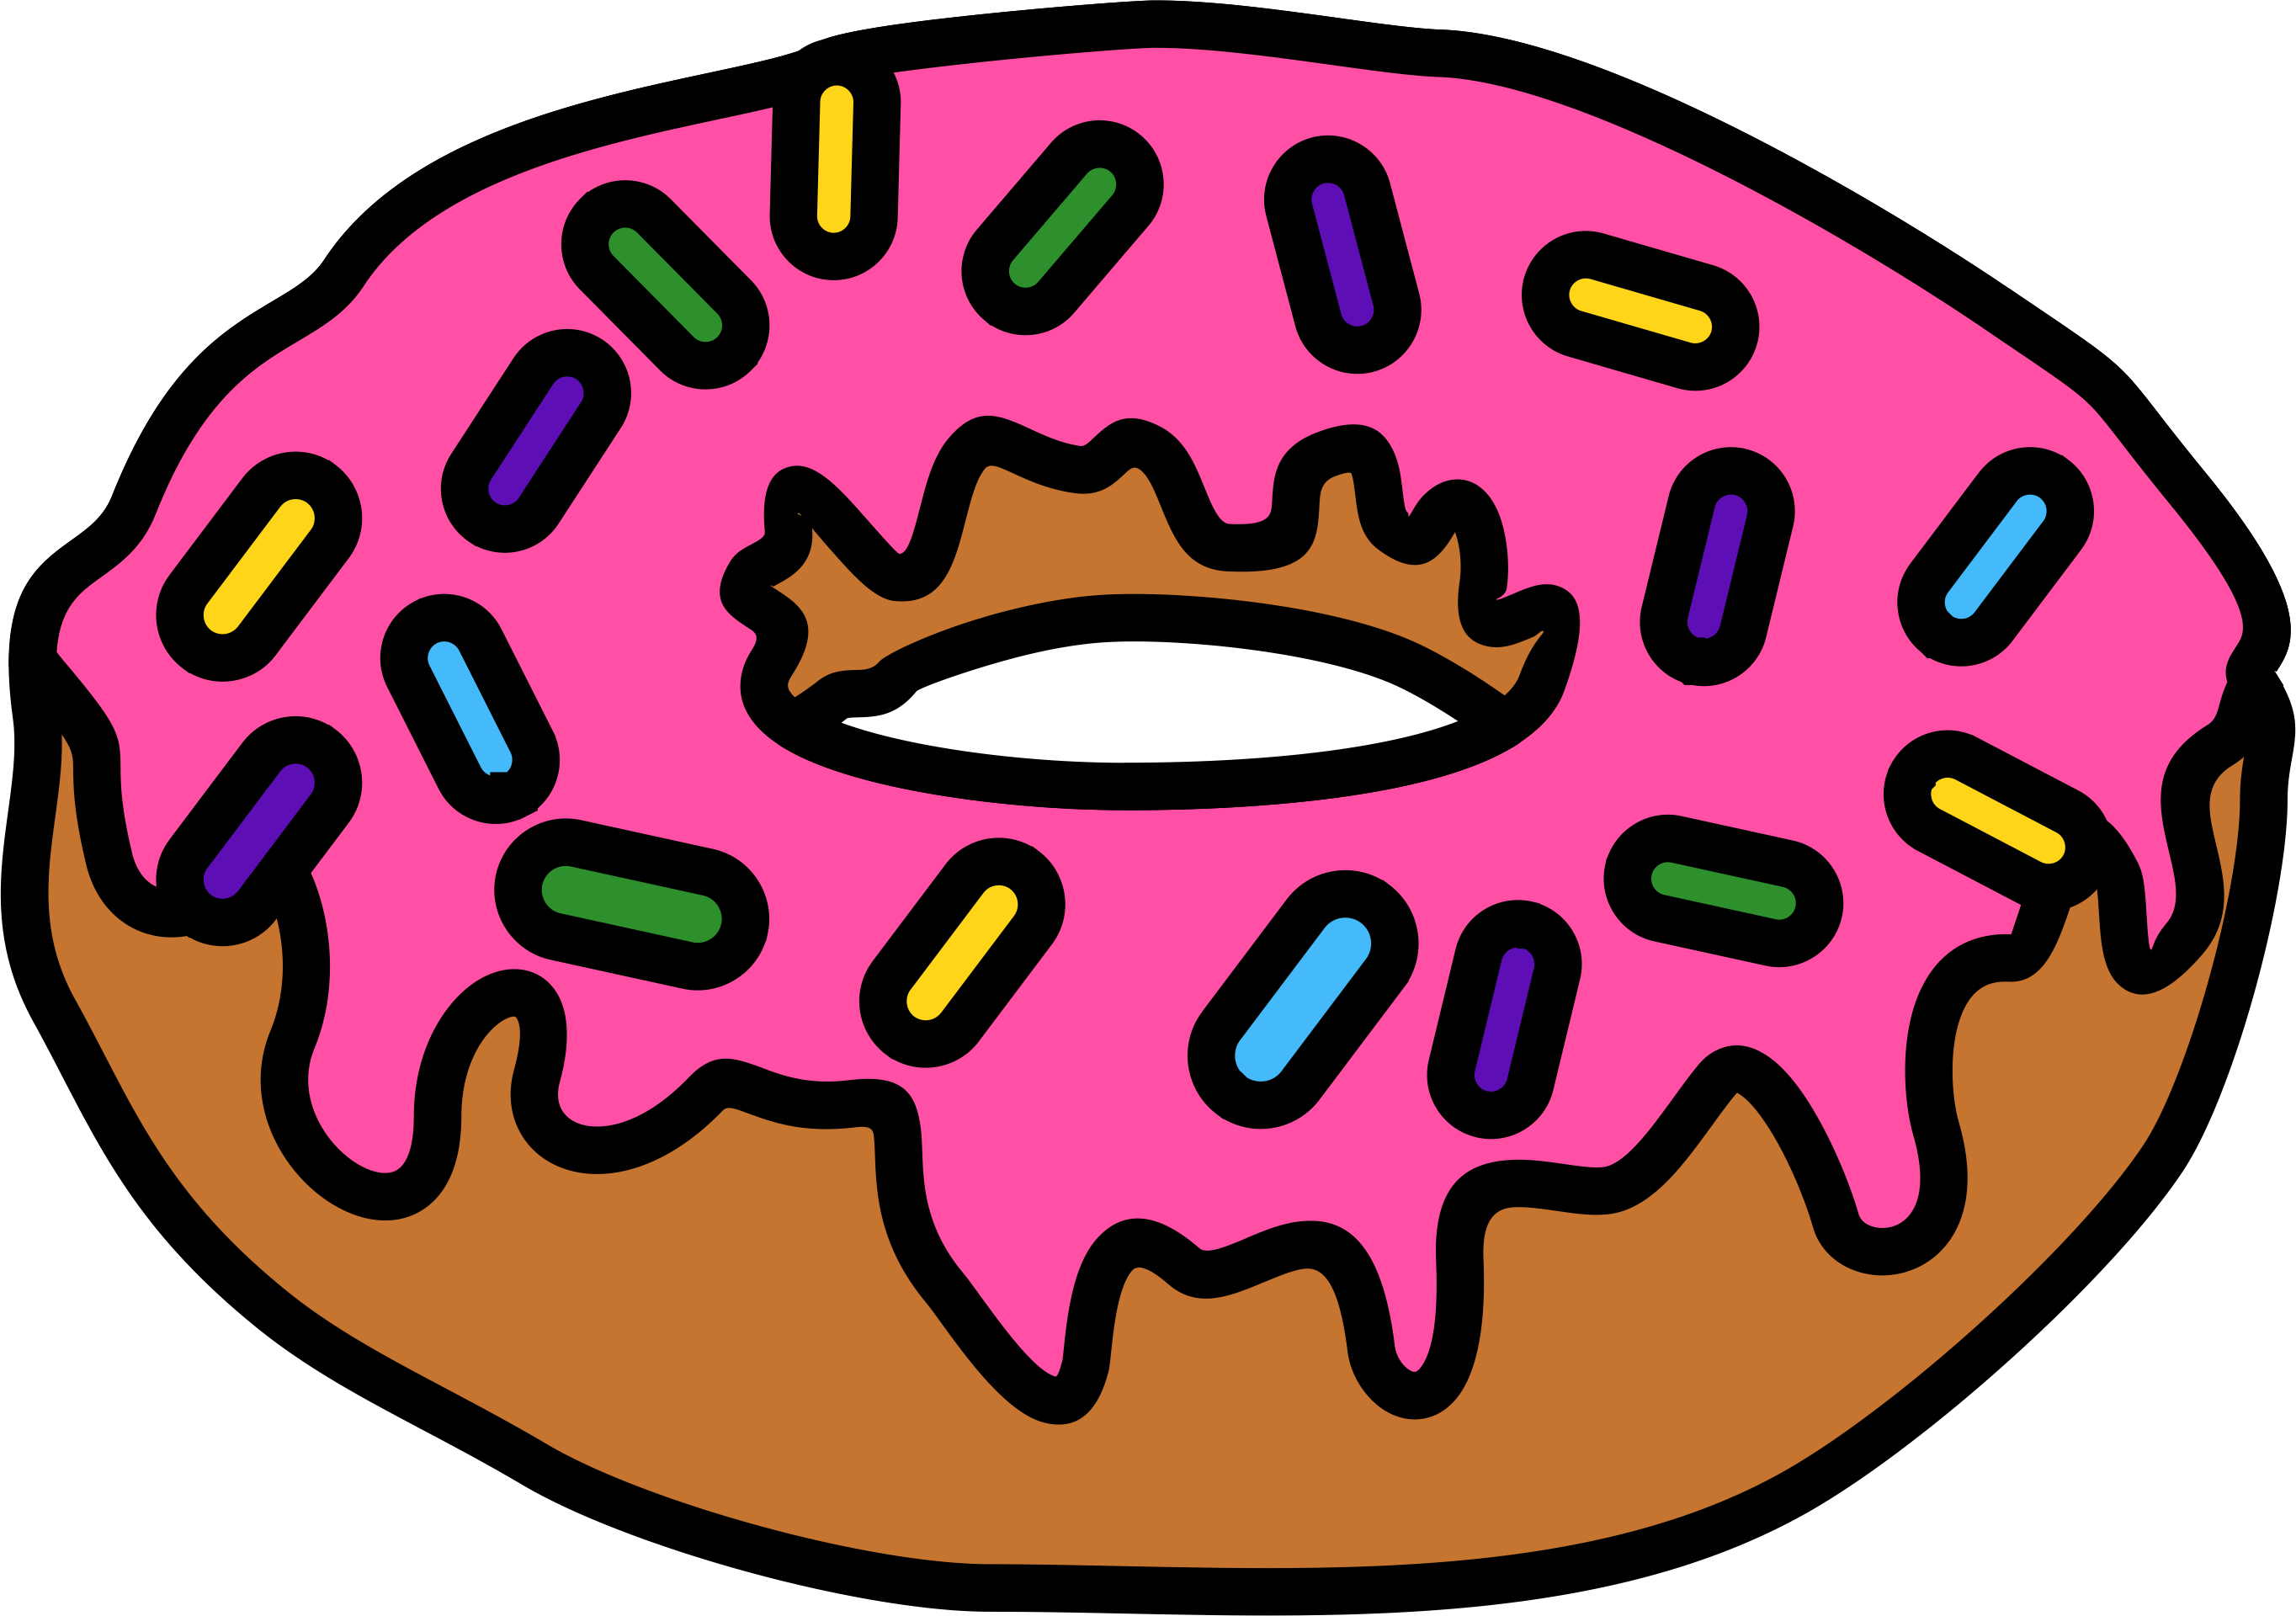 Donut time archives also. Donuts clipart small